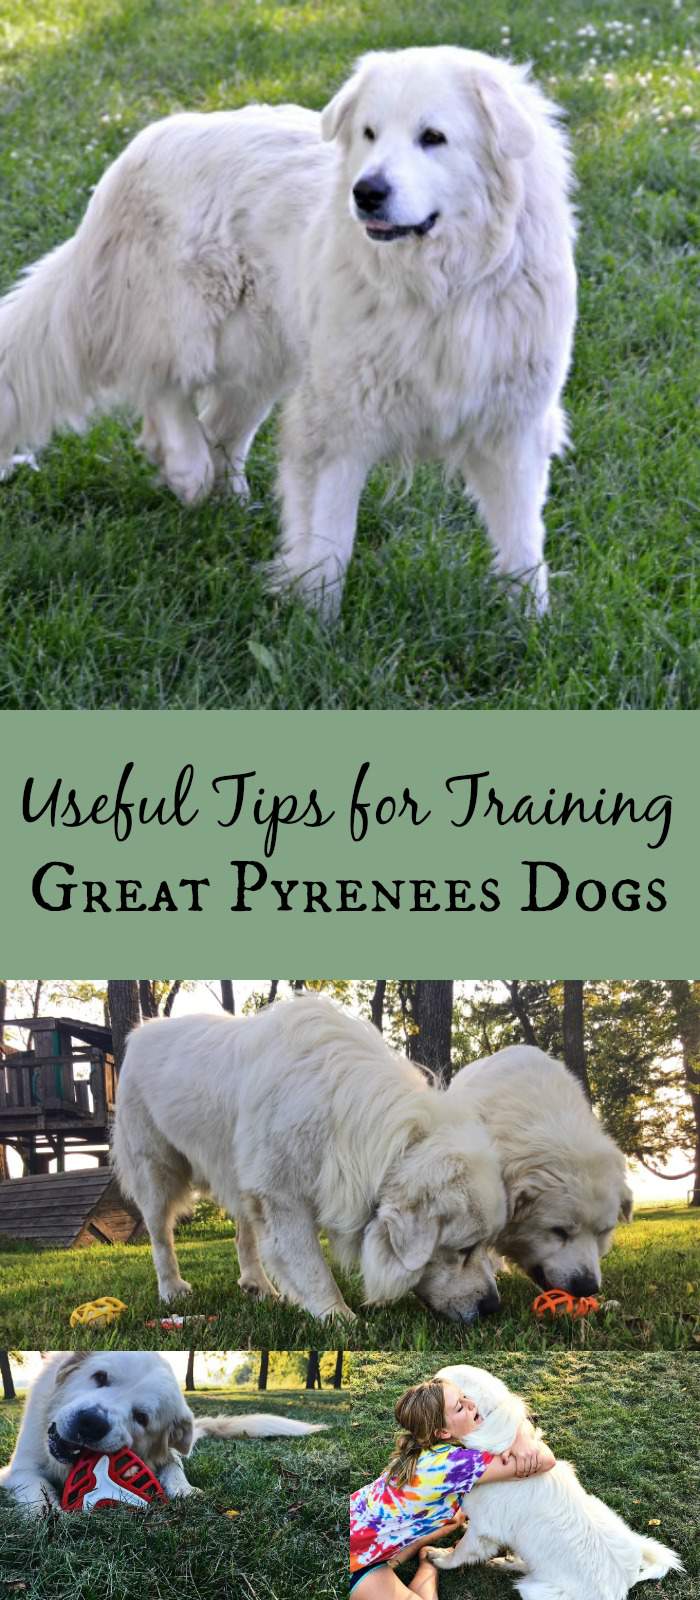 How to Train Great Pyrenees - 5 Useful Tips | Simplify ...